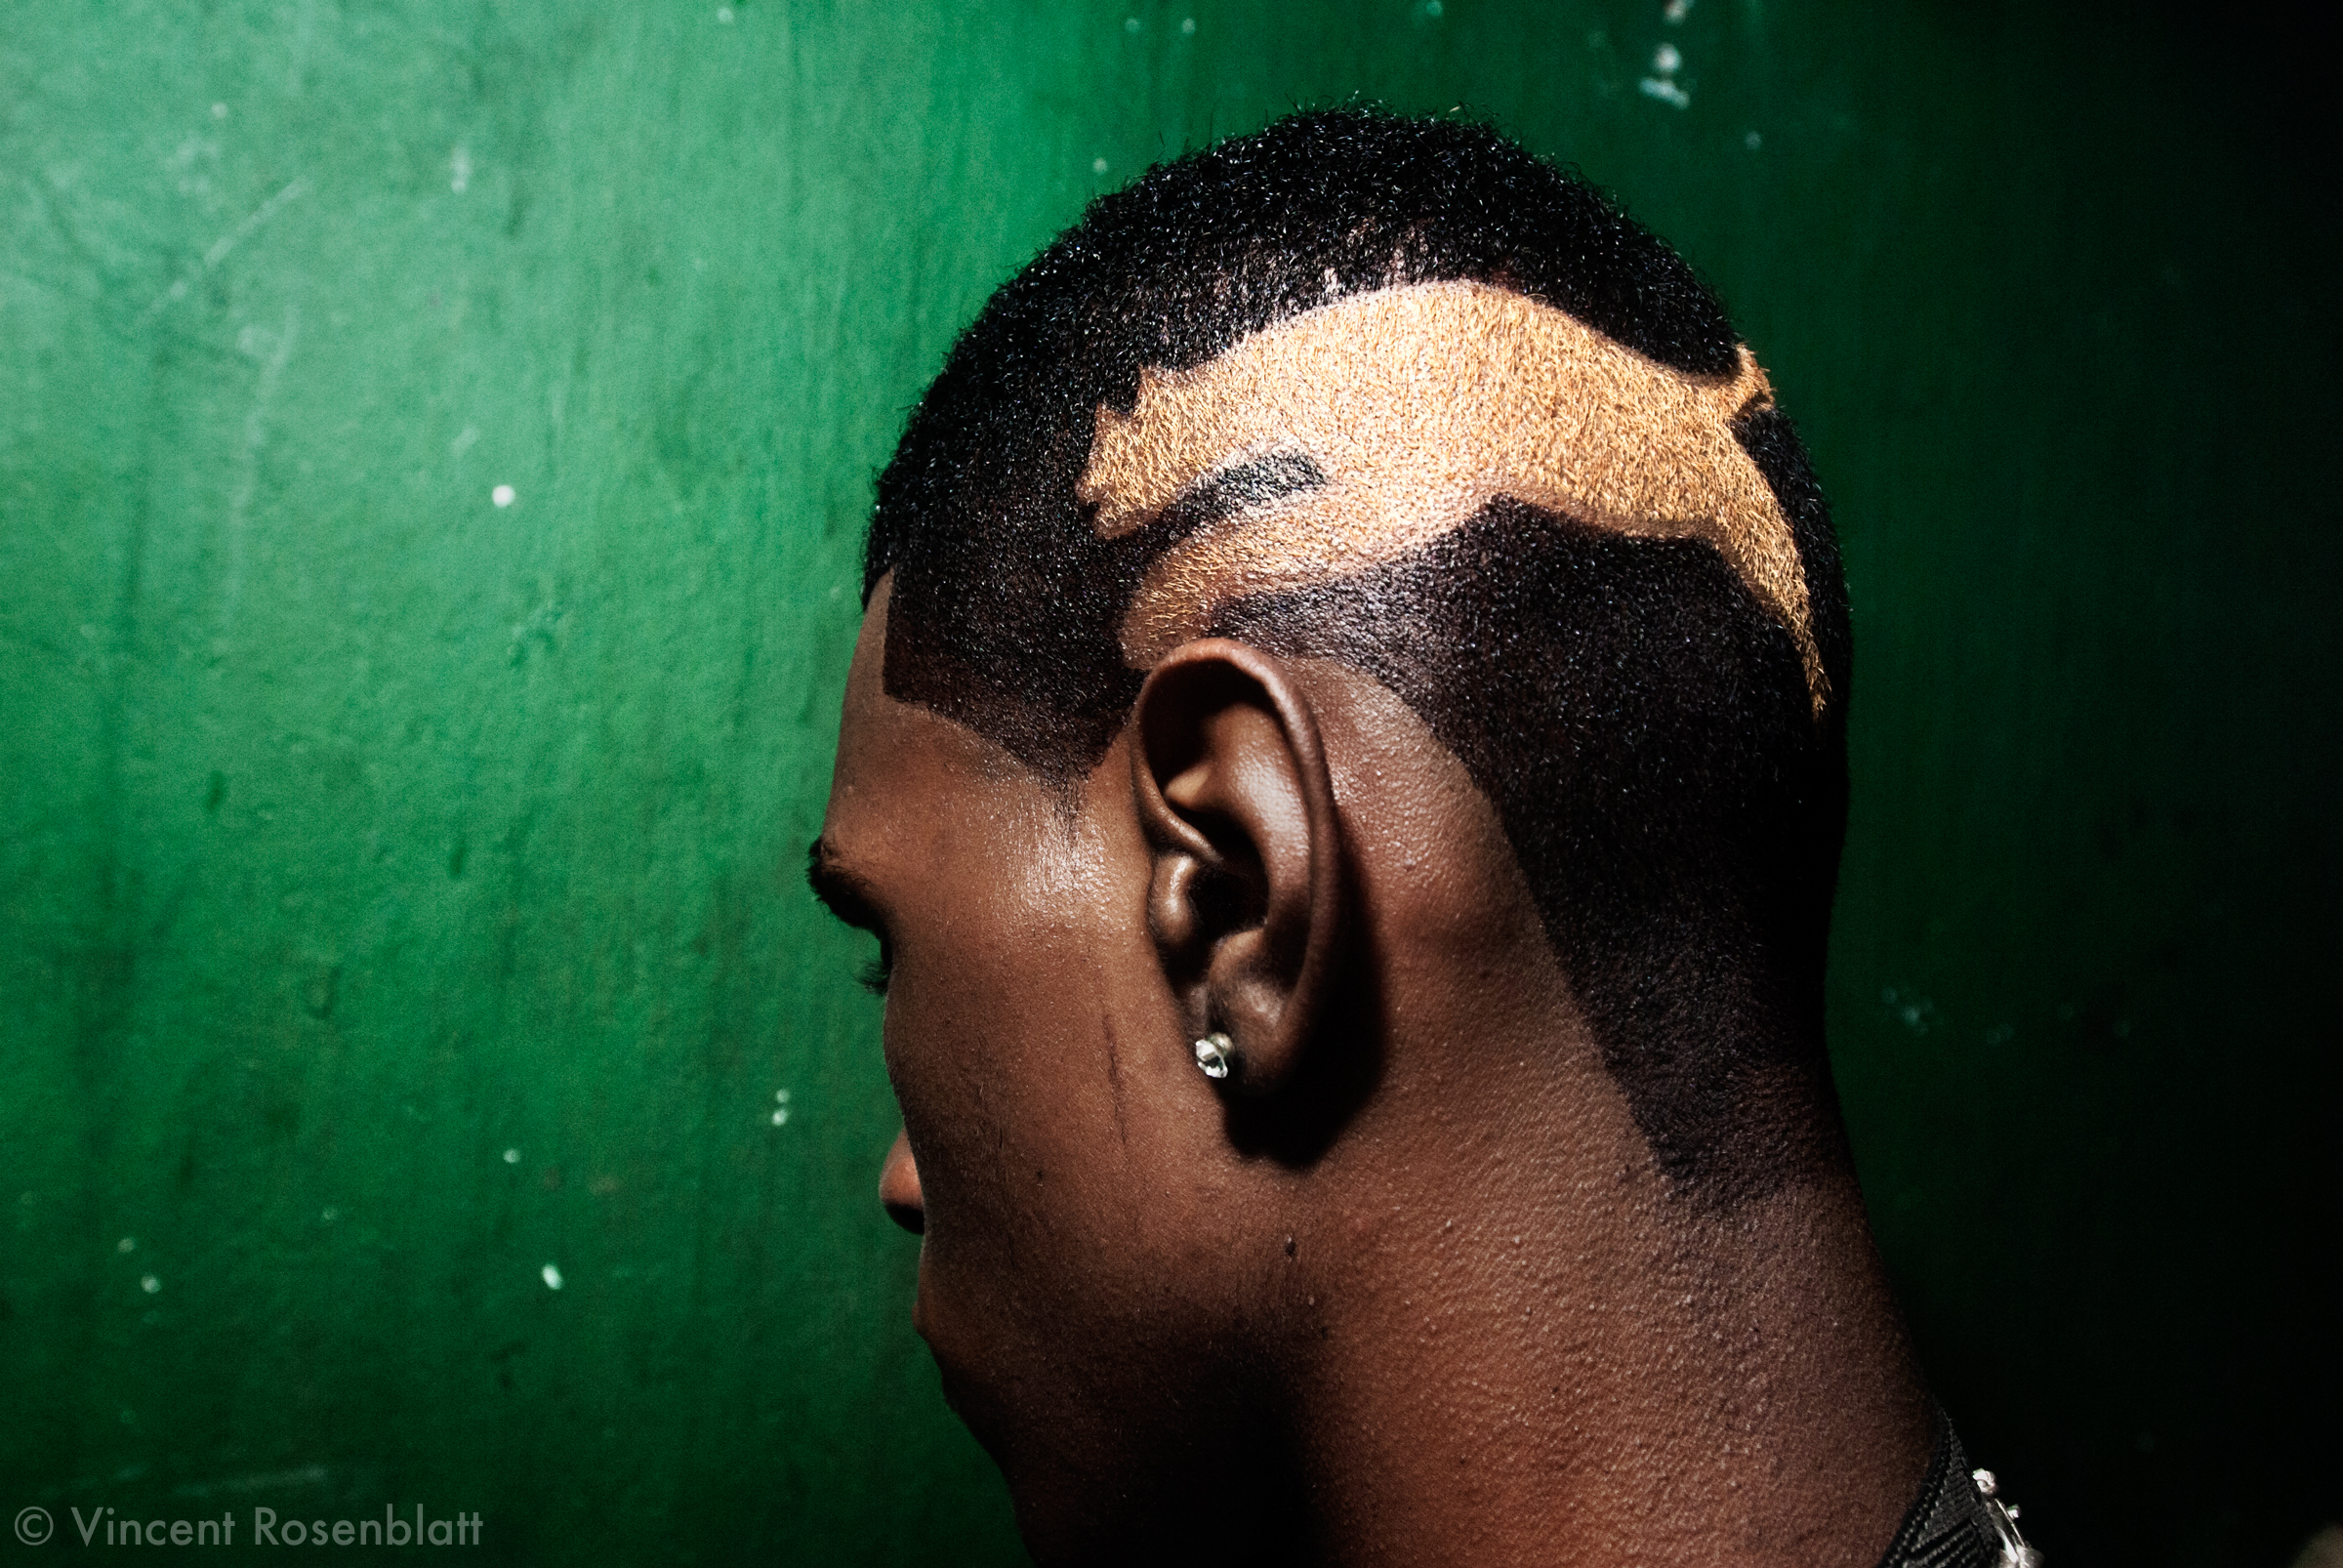  MC Ombrinho, a young funk singer from the favela Turano, had his hair cut and dyed with the Puma sneakers' logo. Baile atclub Boqueirão, Downtown Rio de Janeiro. The Funk carioca movement is fashion and look as well : the boys will use their shaved 